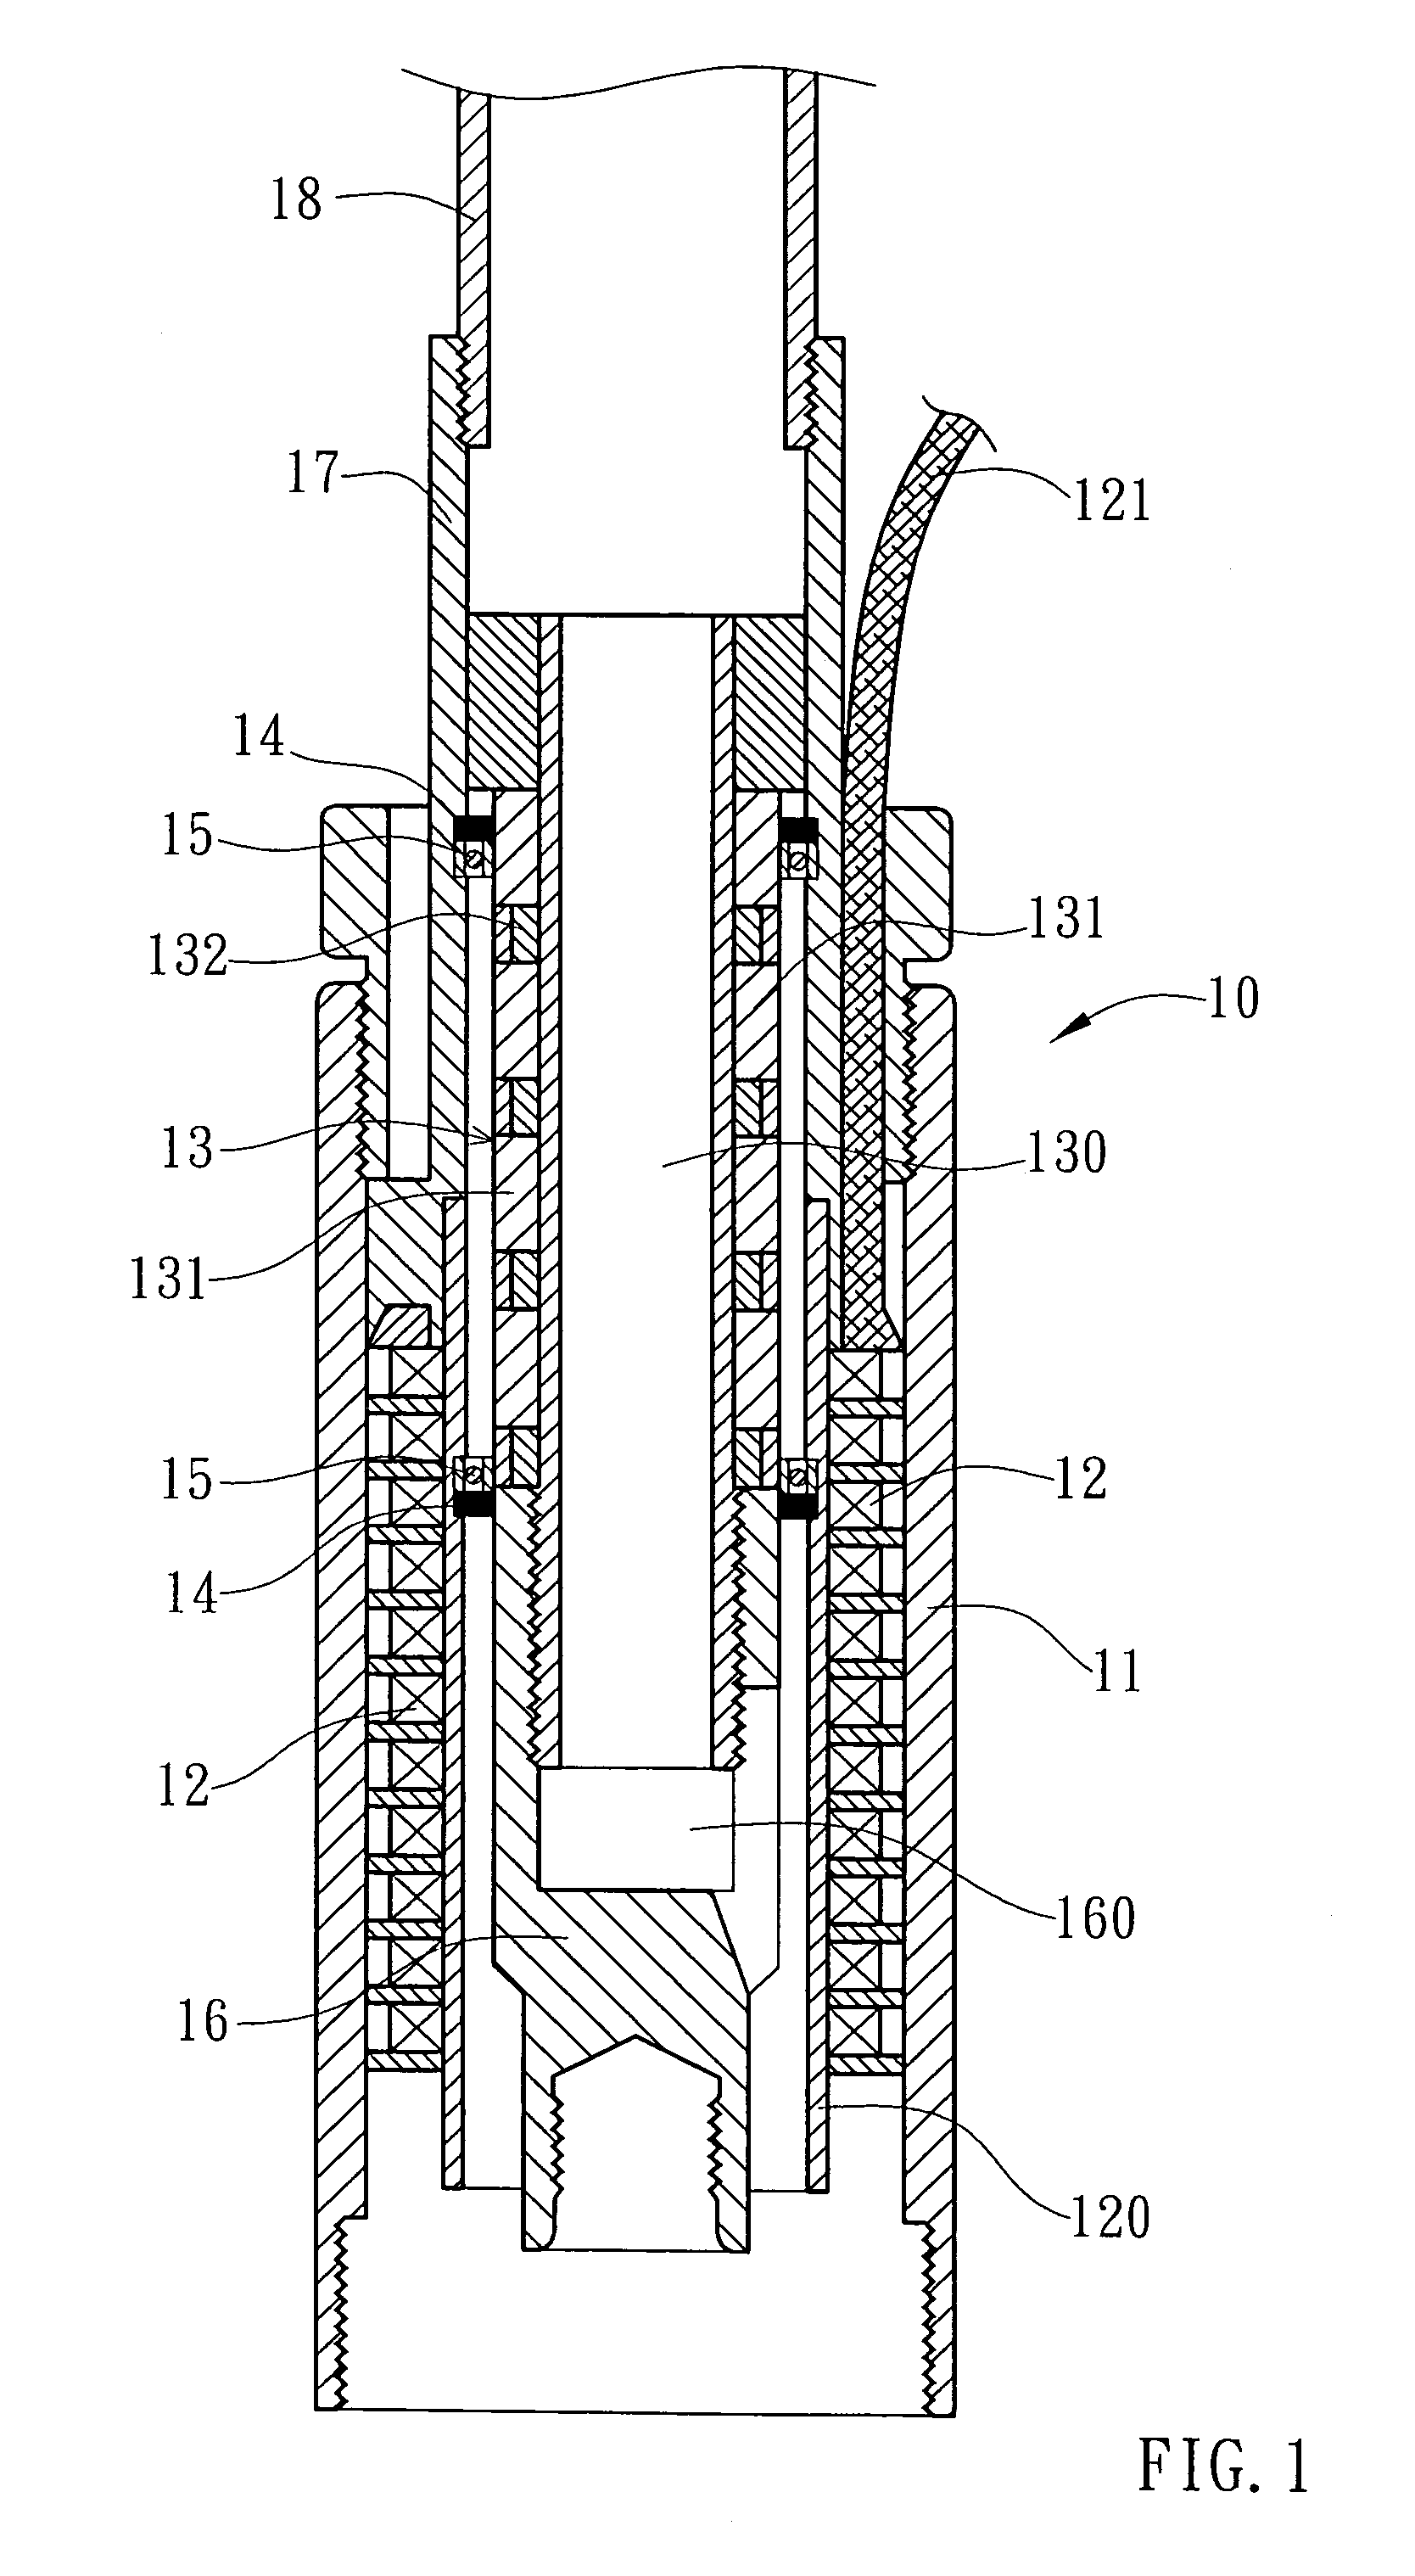 Oil pumping unit using an electrical submersible pump driven by a circular linear synchronous three-phase motor with rare earth permanent magnet